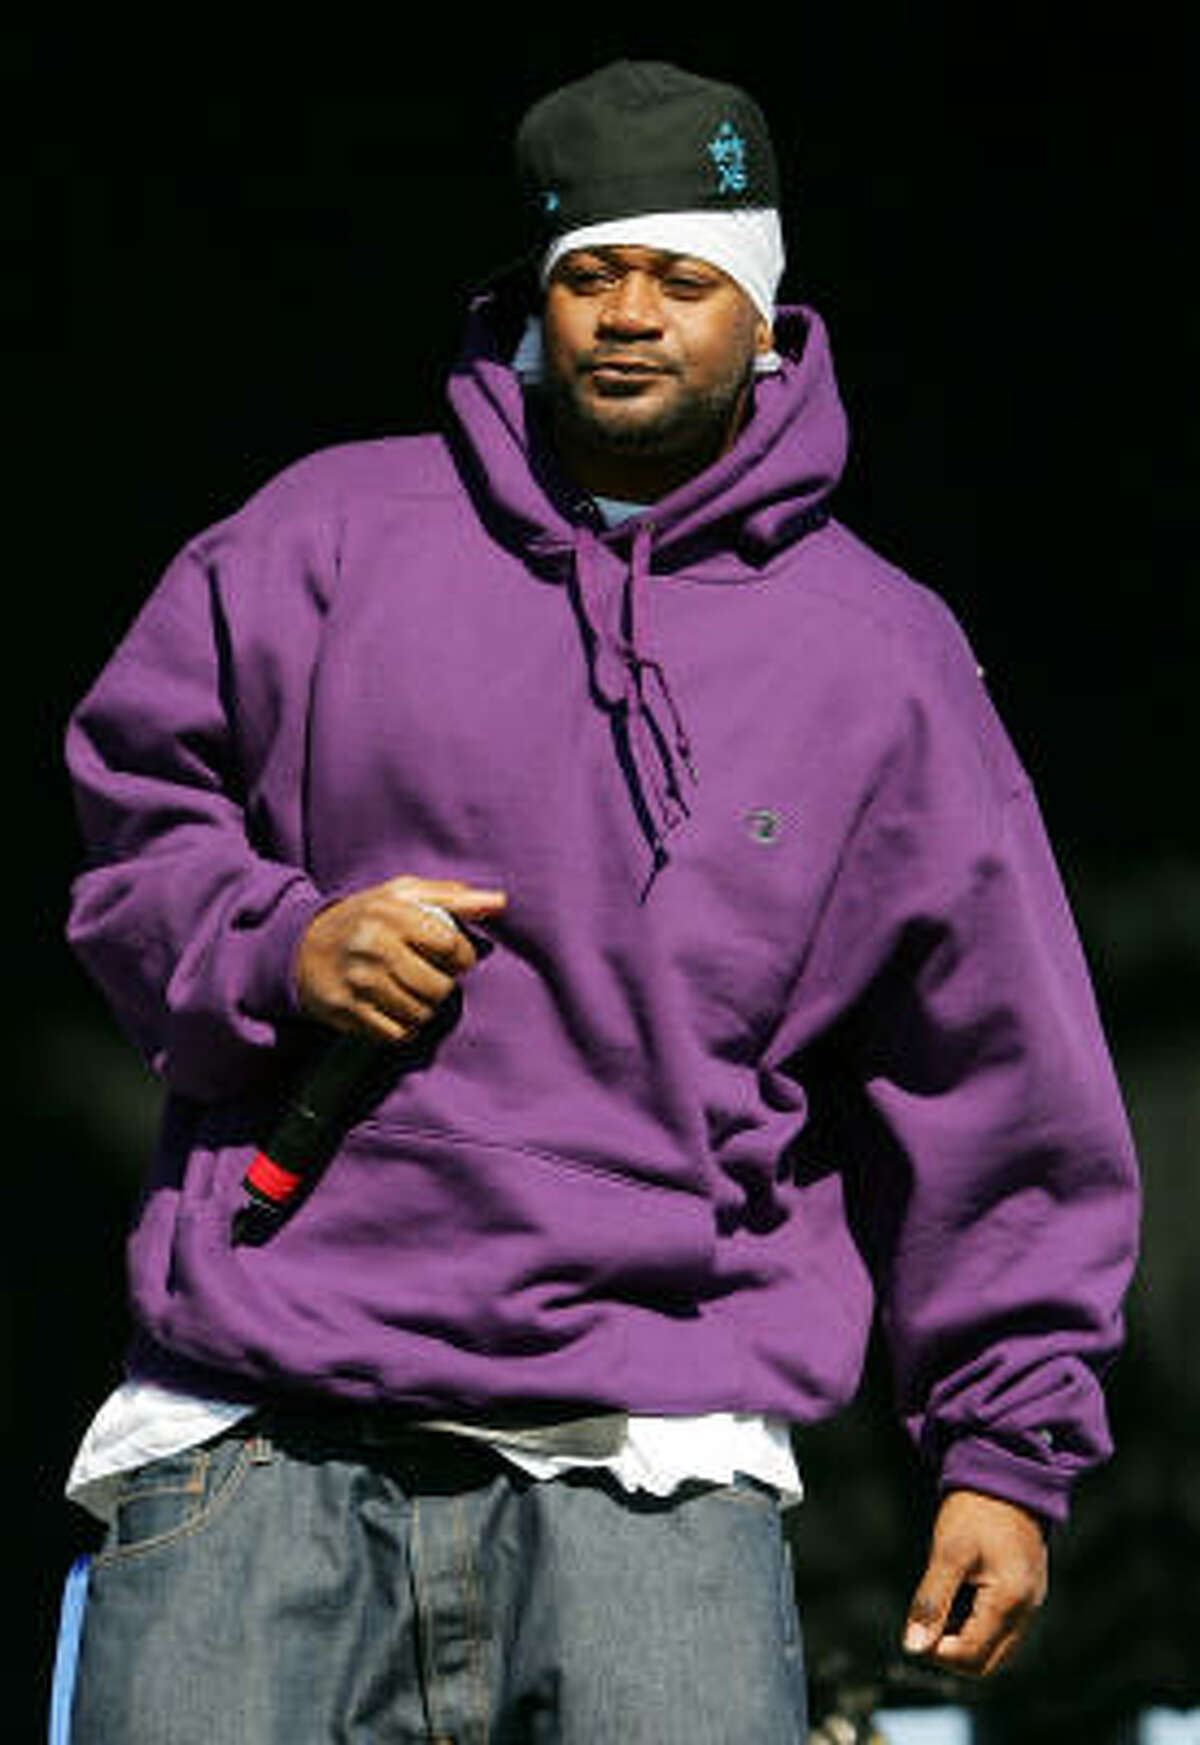 #10 - Ghostface Killah of Wu-Tang Clan (solo album only)5,774 unique words